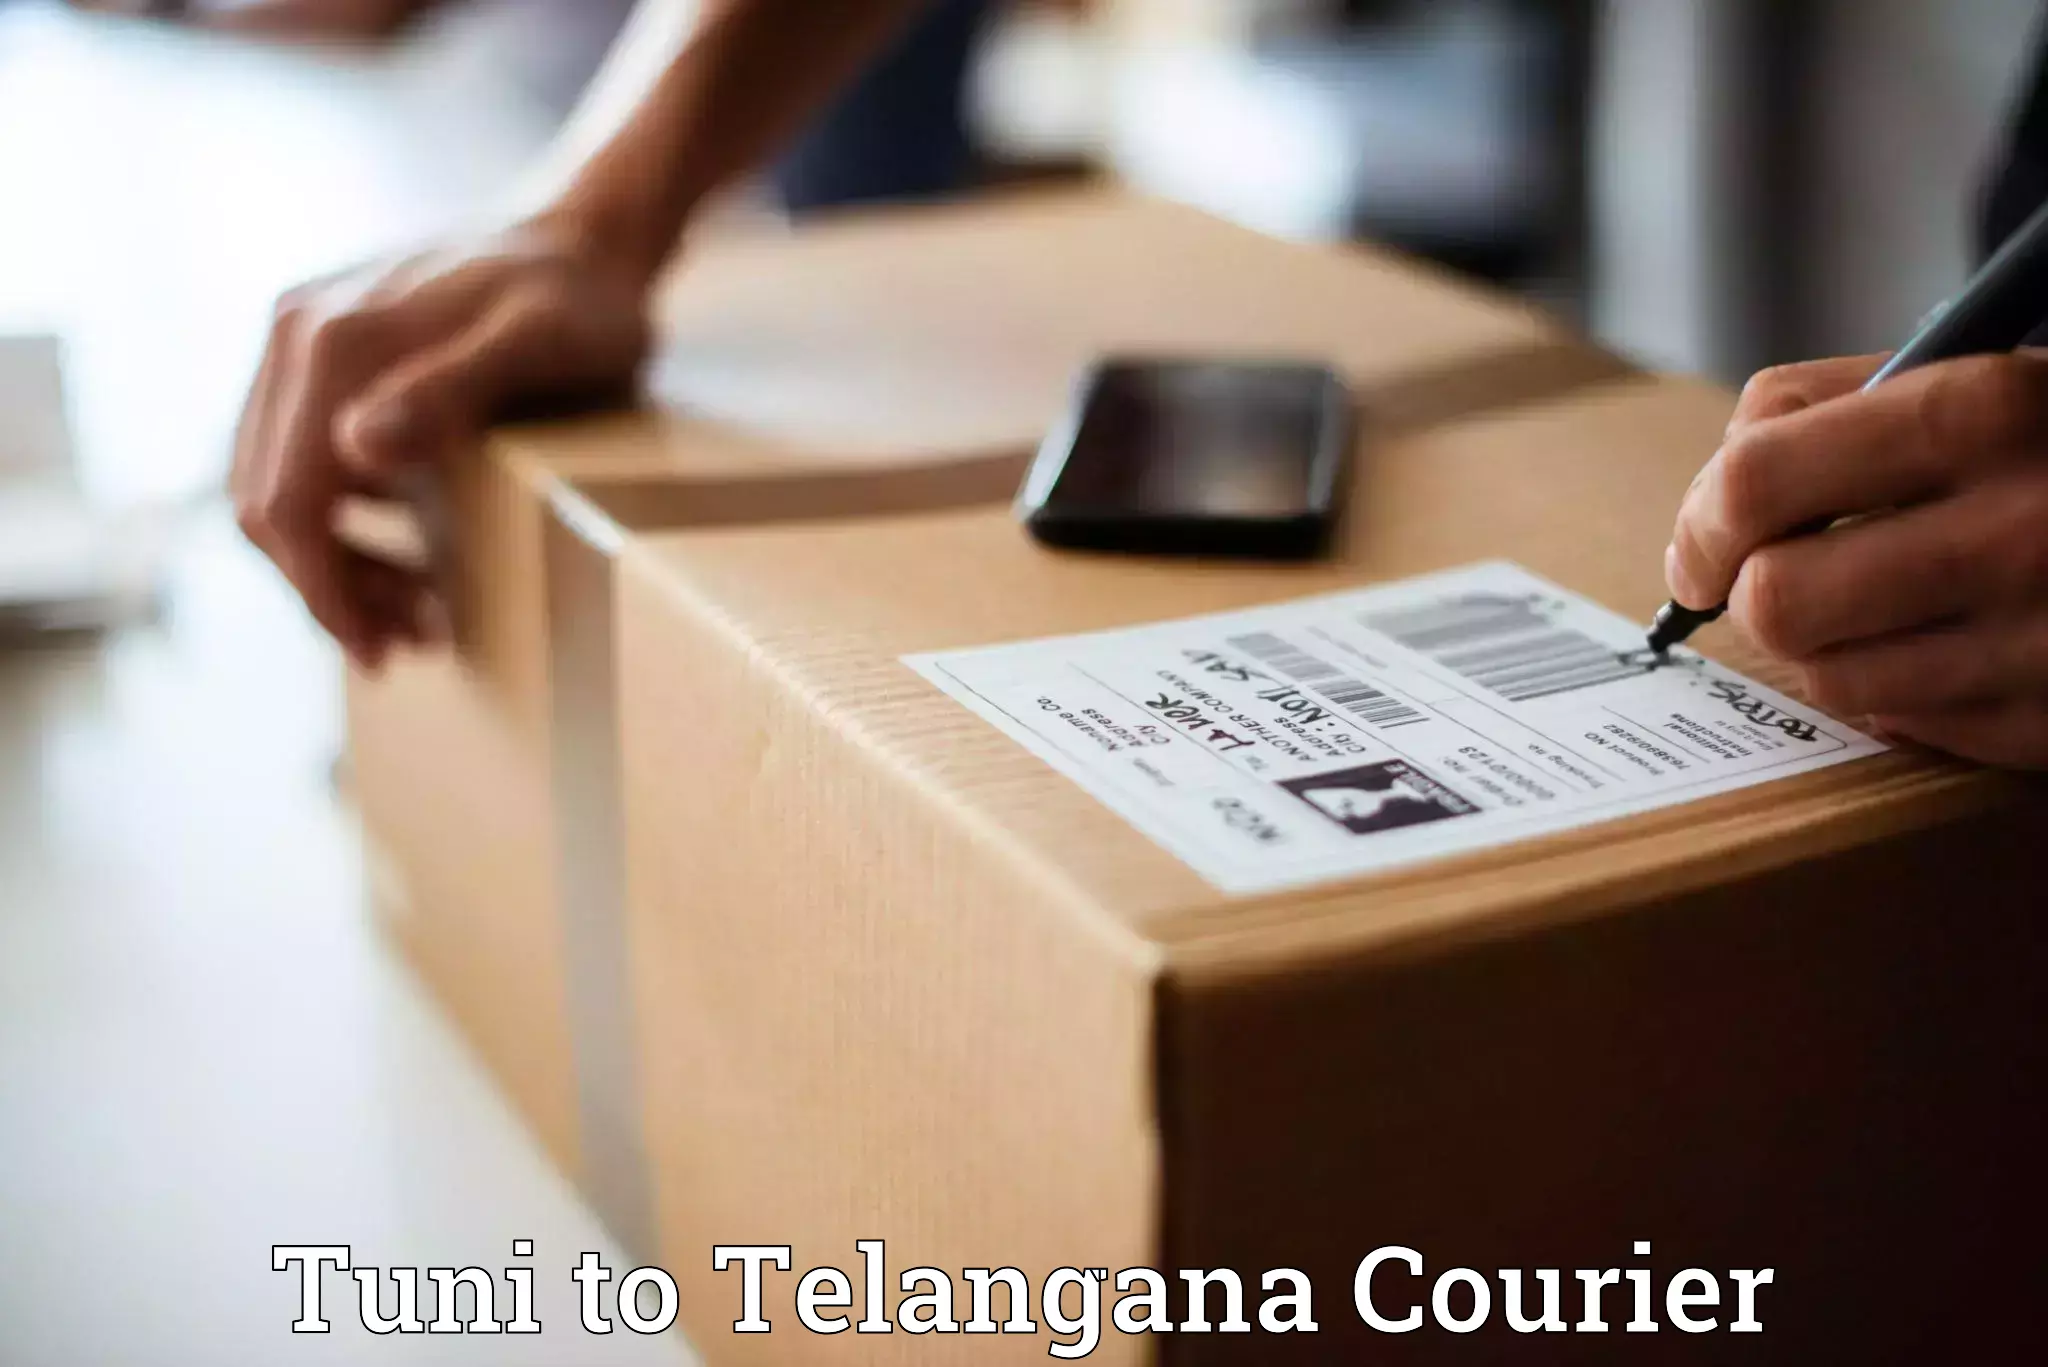 Nationwide delivery network Tuni to Telangana